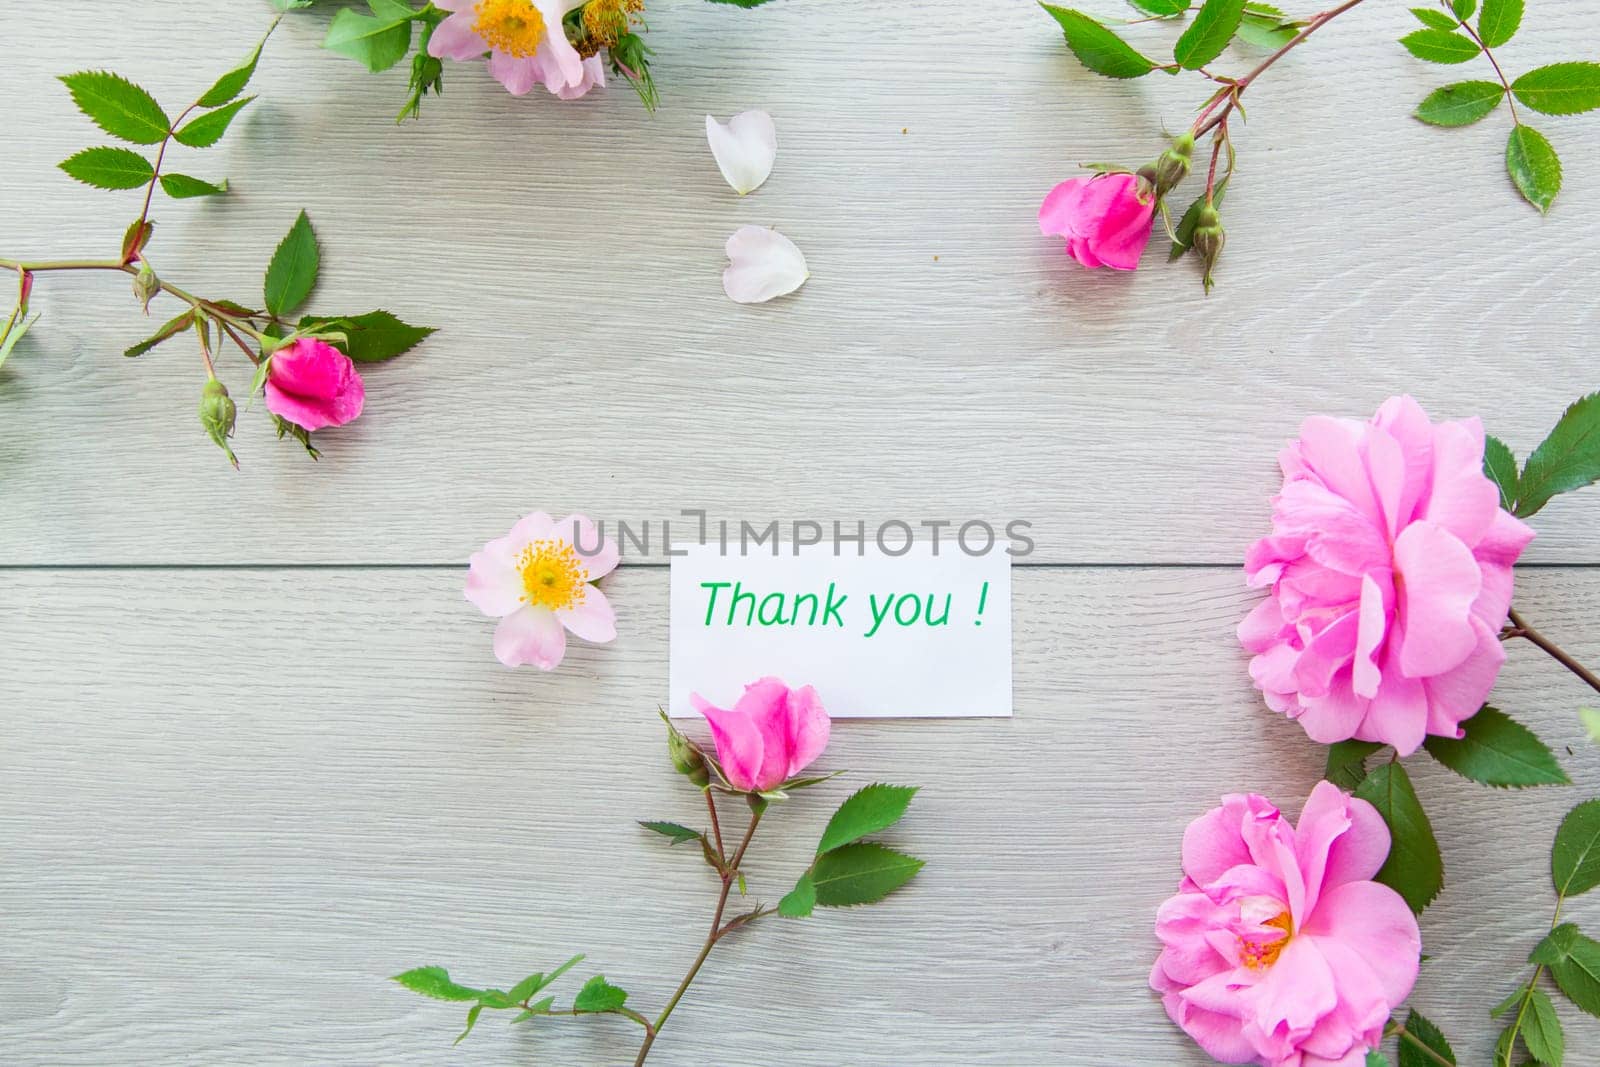 light wooden background with bright pink roses .